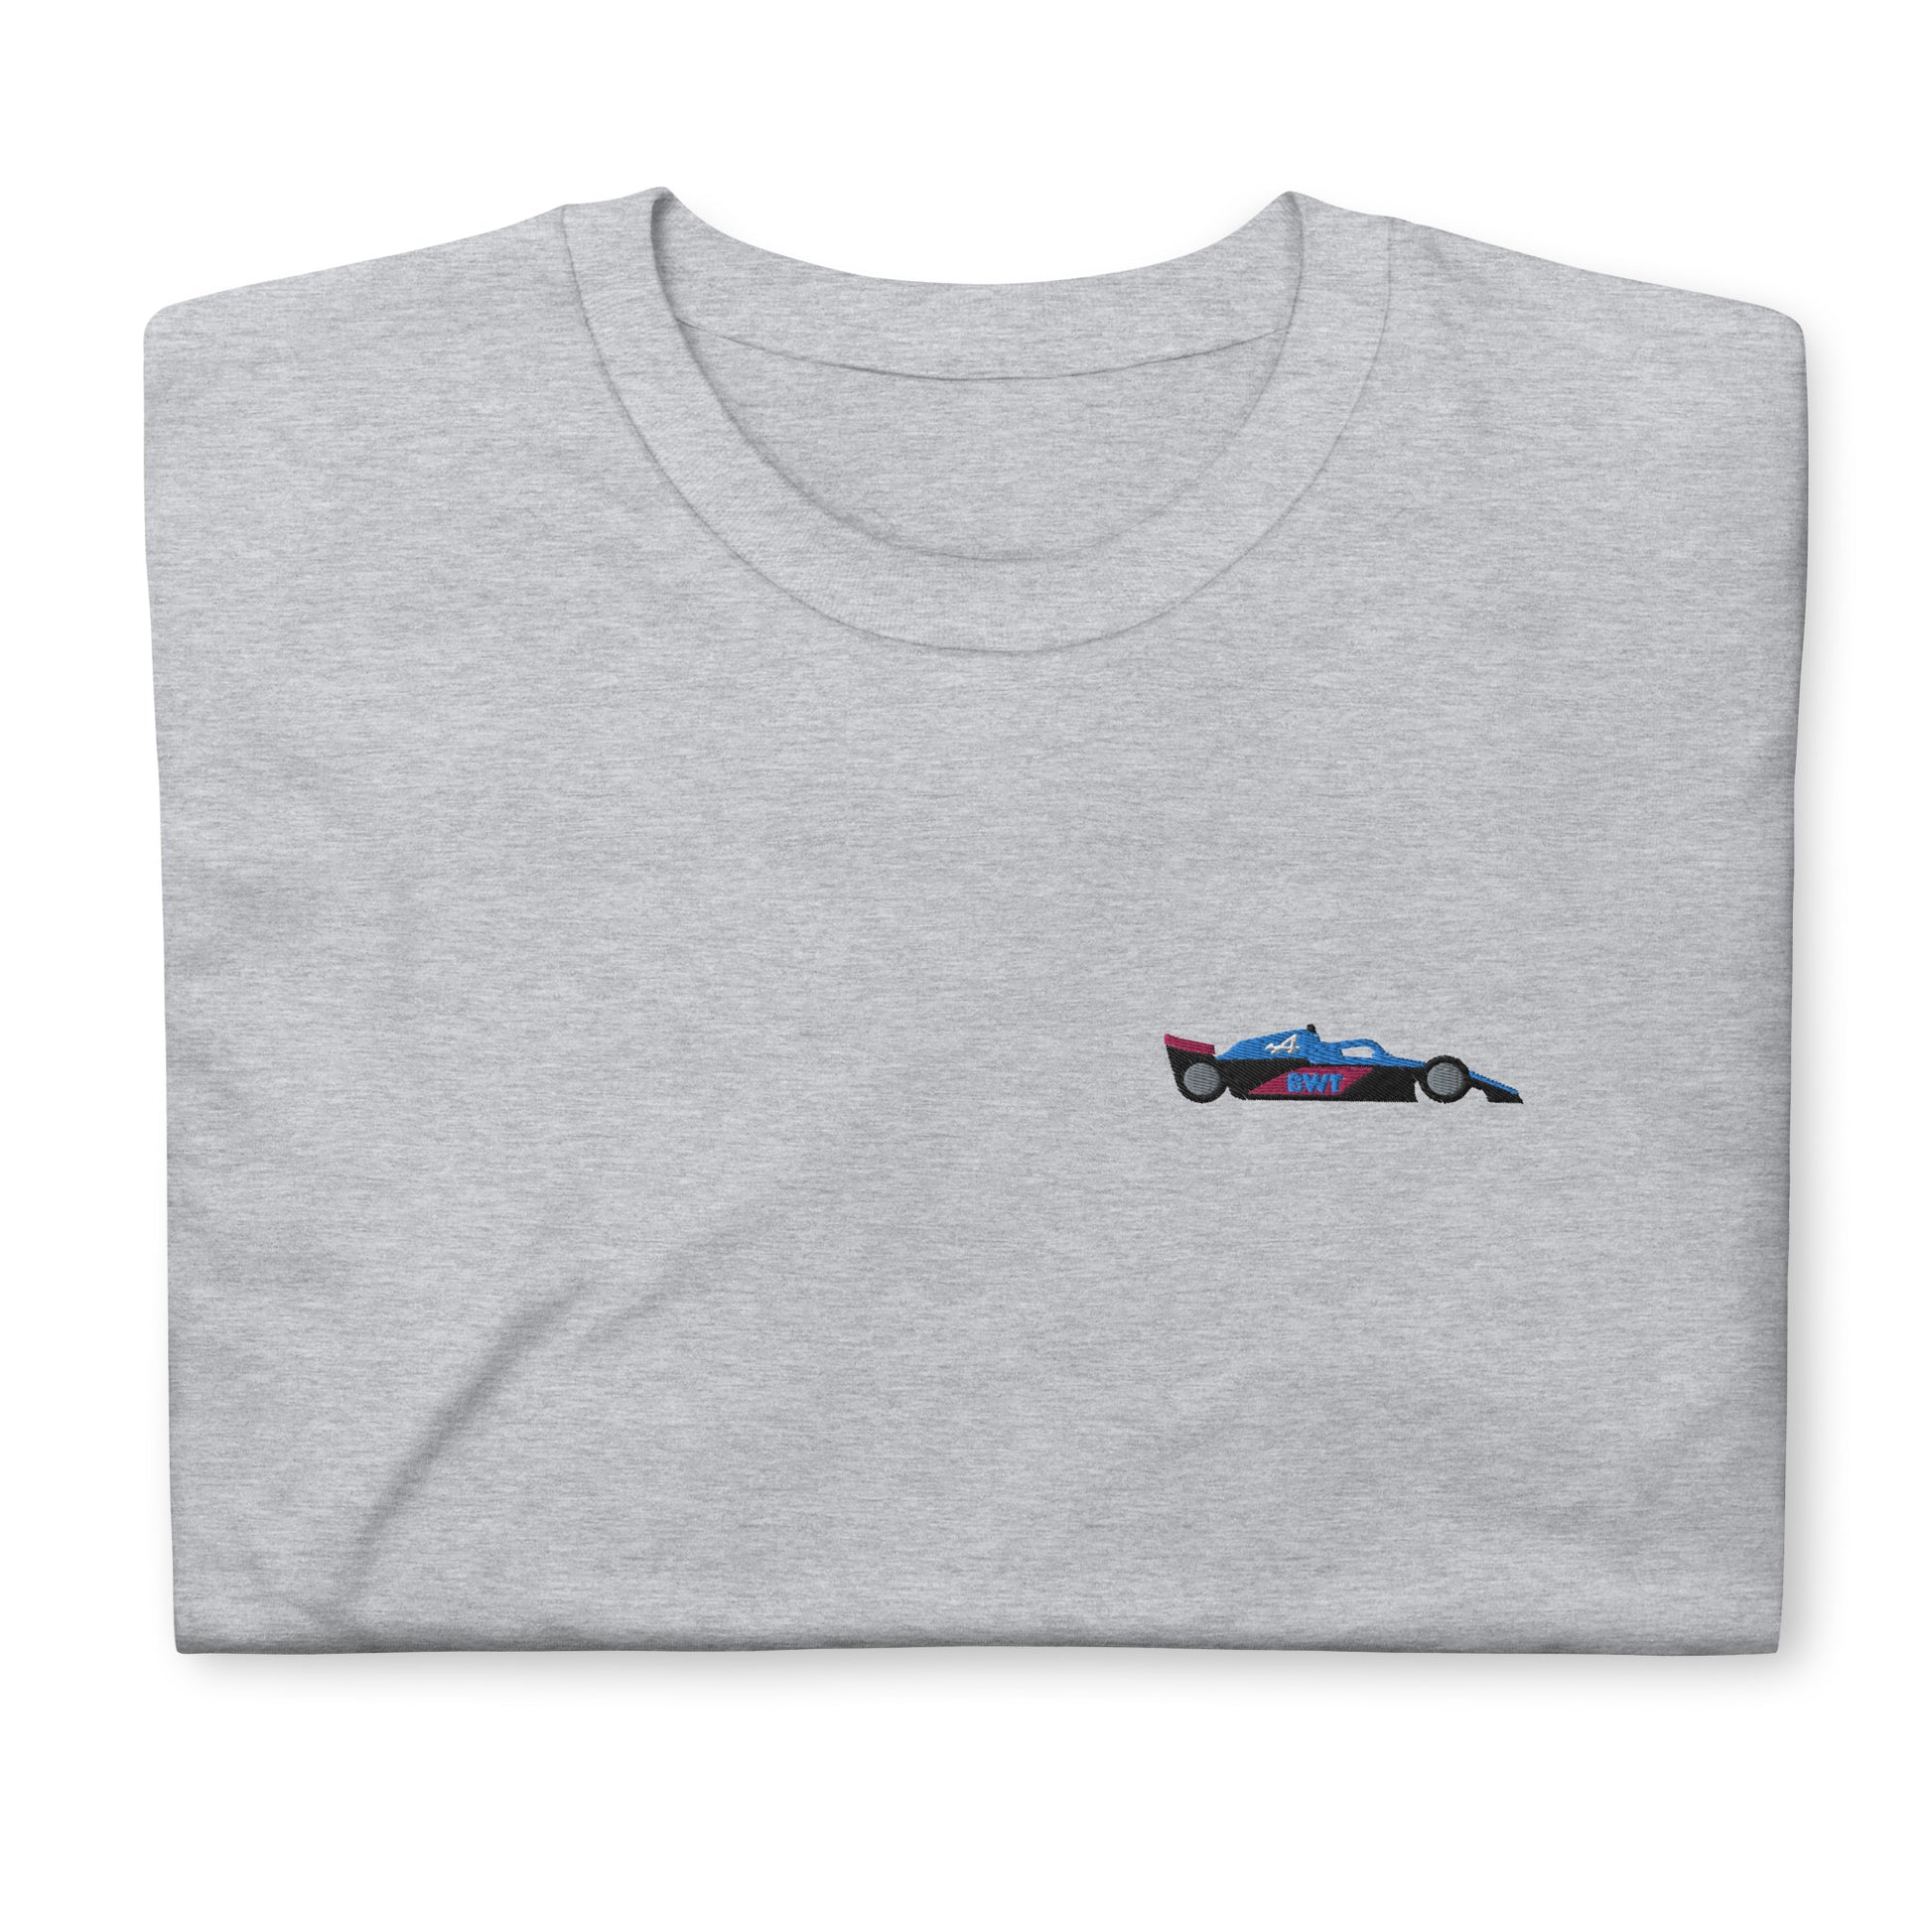 Embroidered Alpine F1 Car Unisex T-Shirt sport grey front